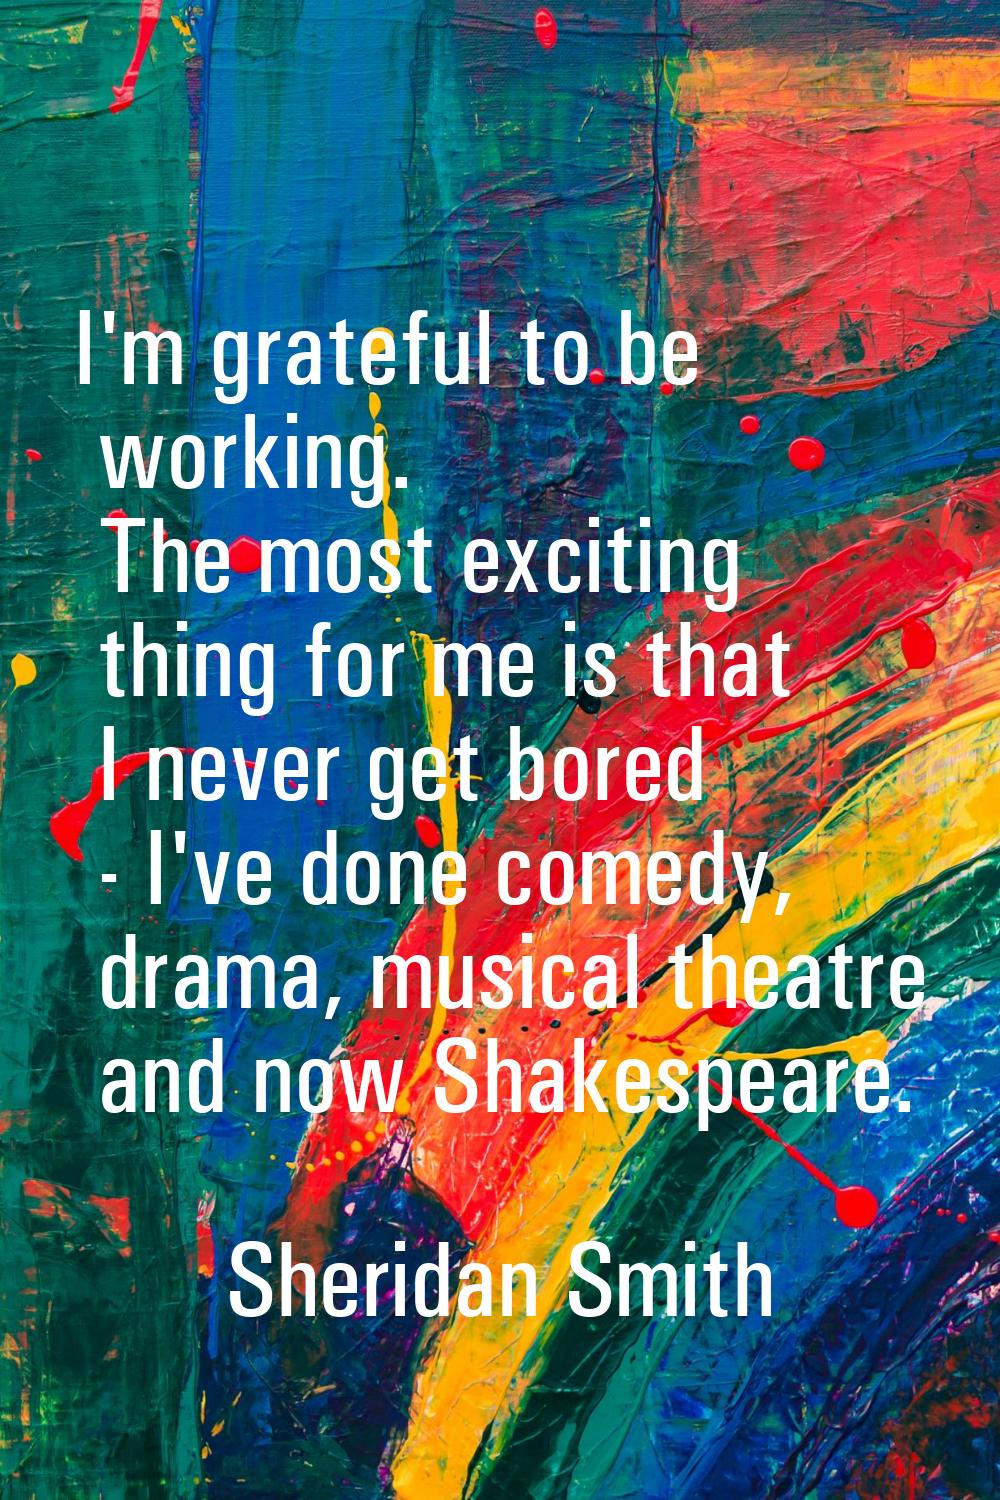 I'm grateful to be working. The most exciting thing for me is that I never get bored - I've done co